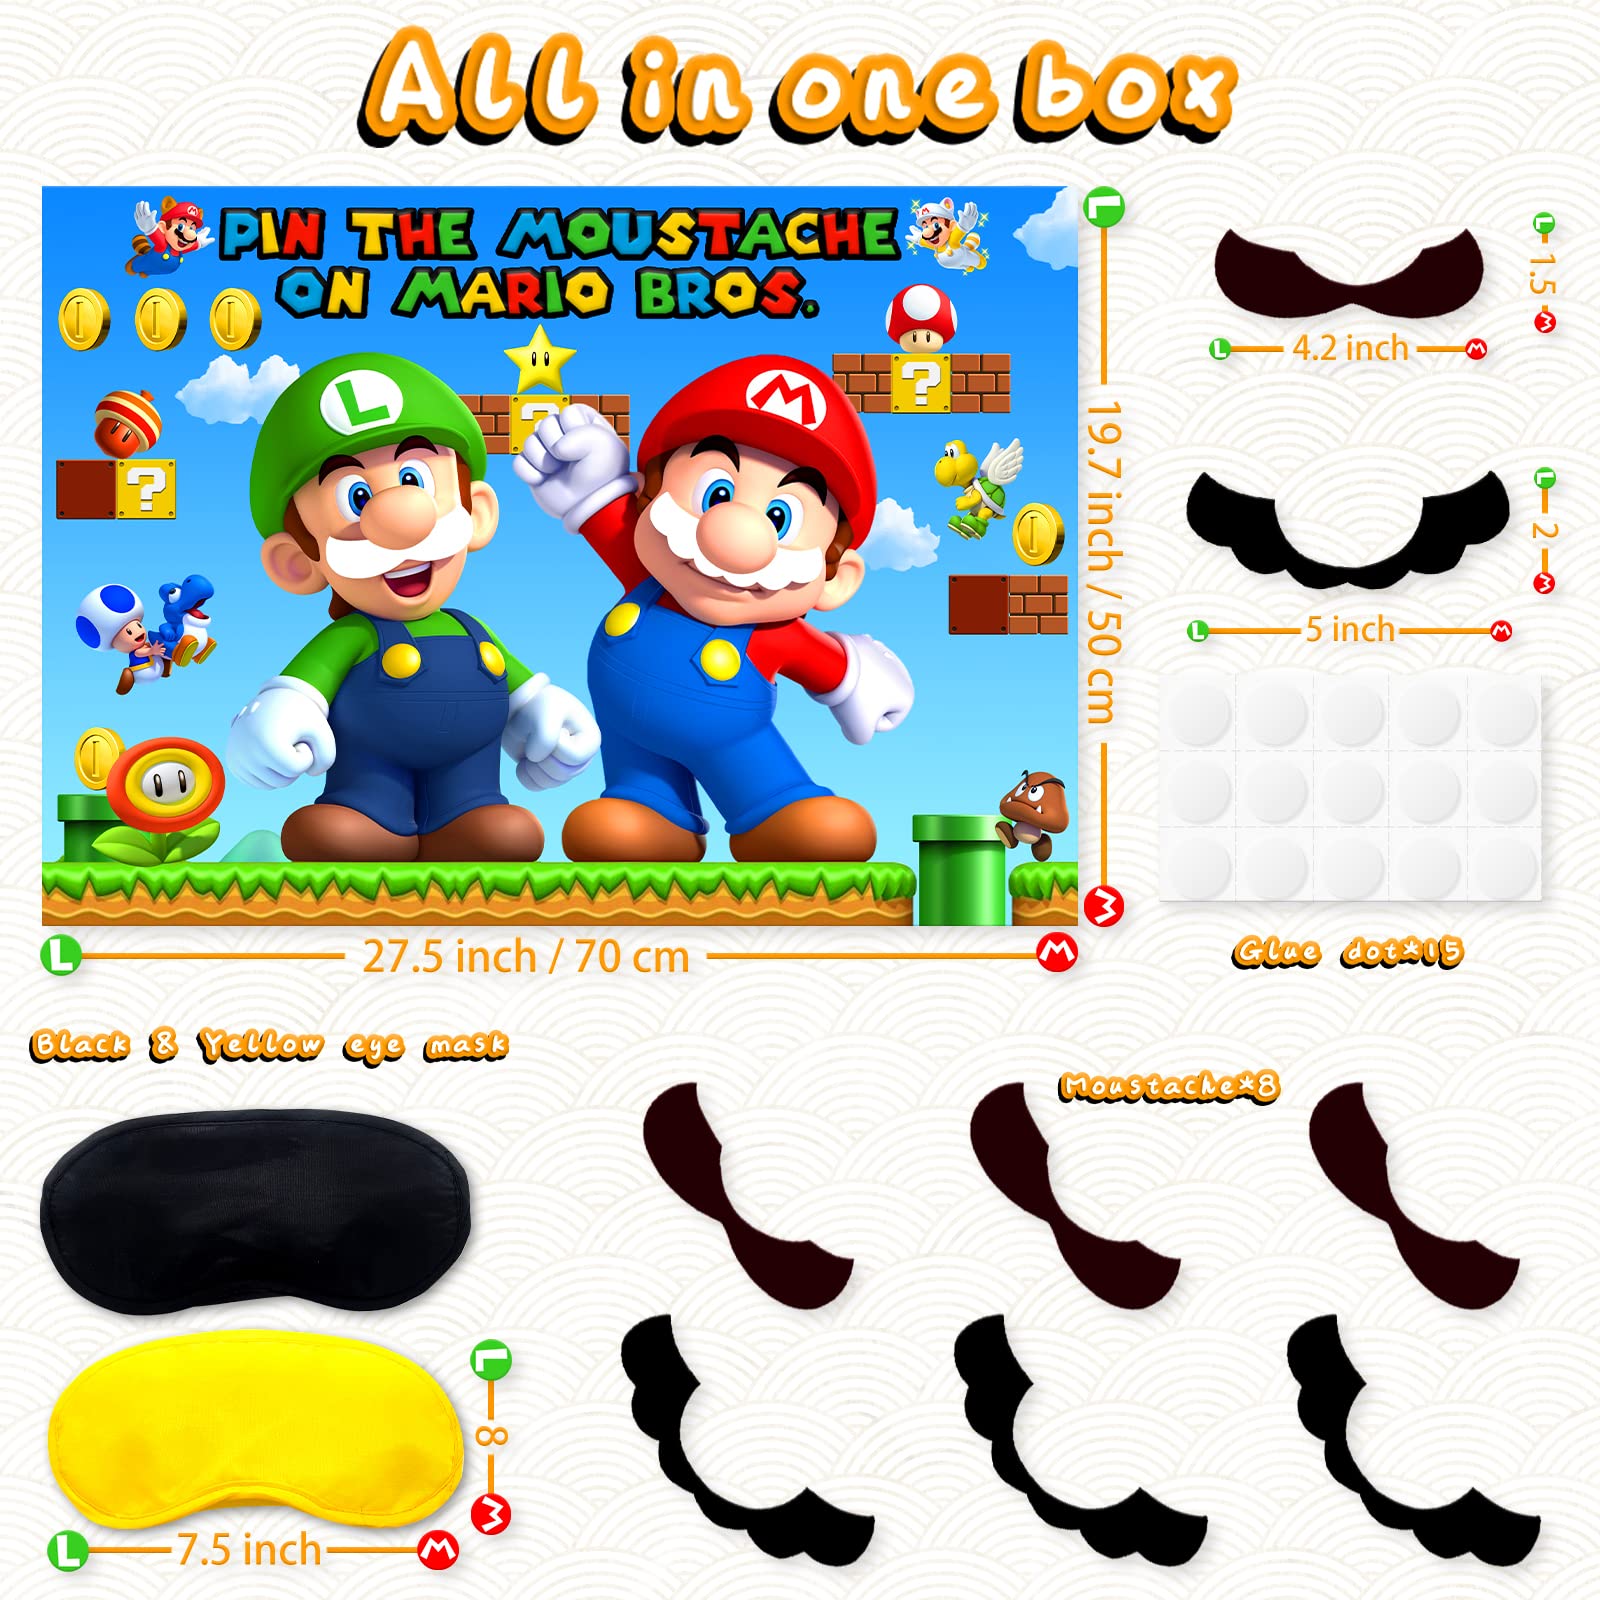 Pin the Moustache on the Bros Party Game Reusable Stickers and Large Felt Poster Super Brother Game Party Supplies for Wall Decorations Favors